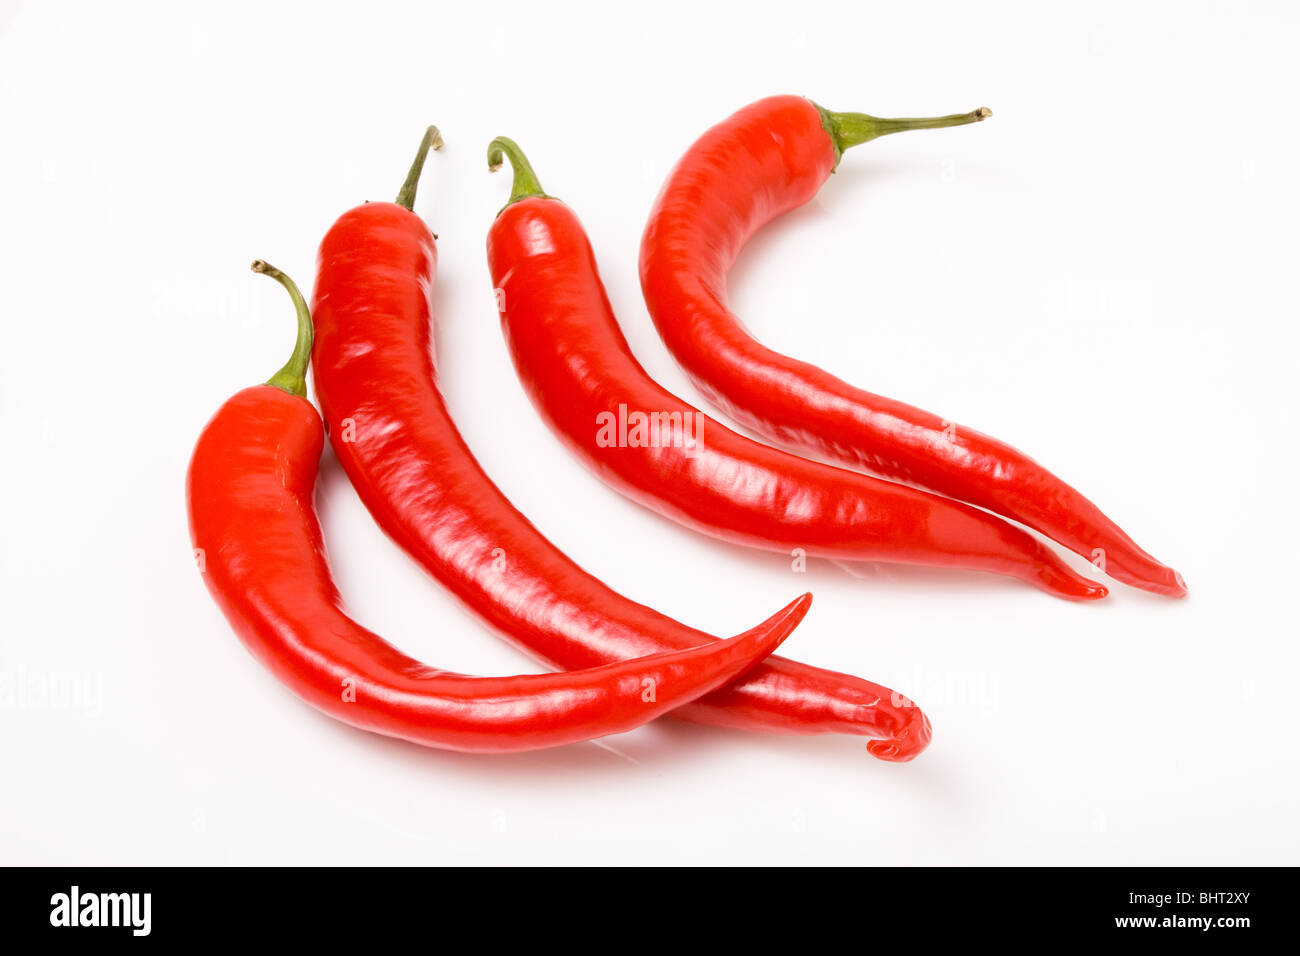 four vibrant red chillis isolated on white background. Stock Photo